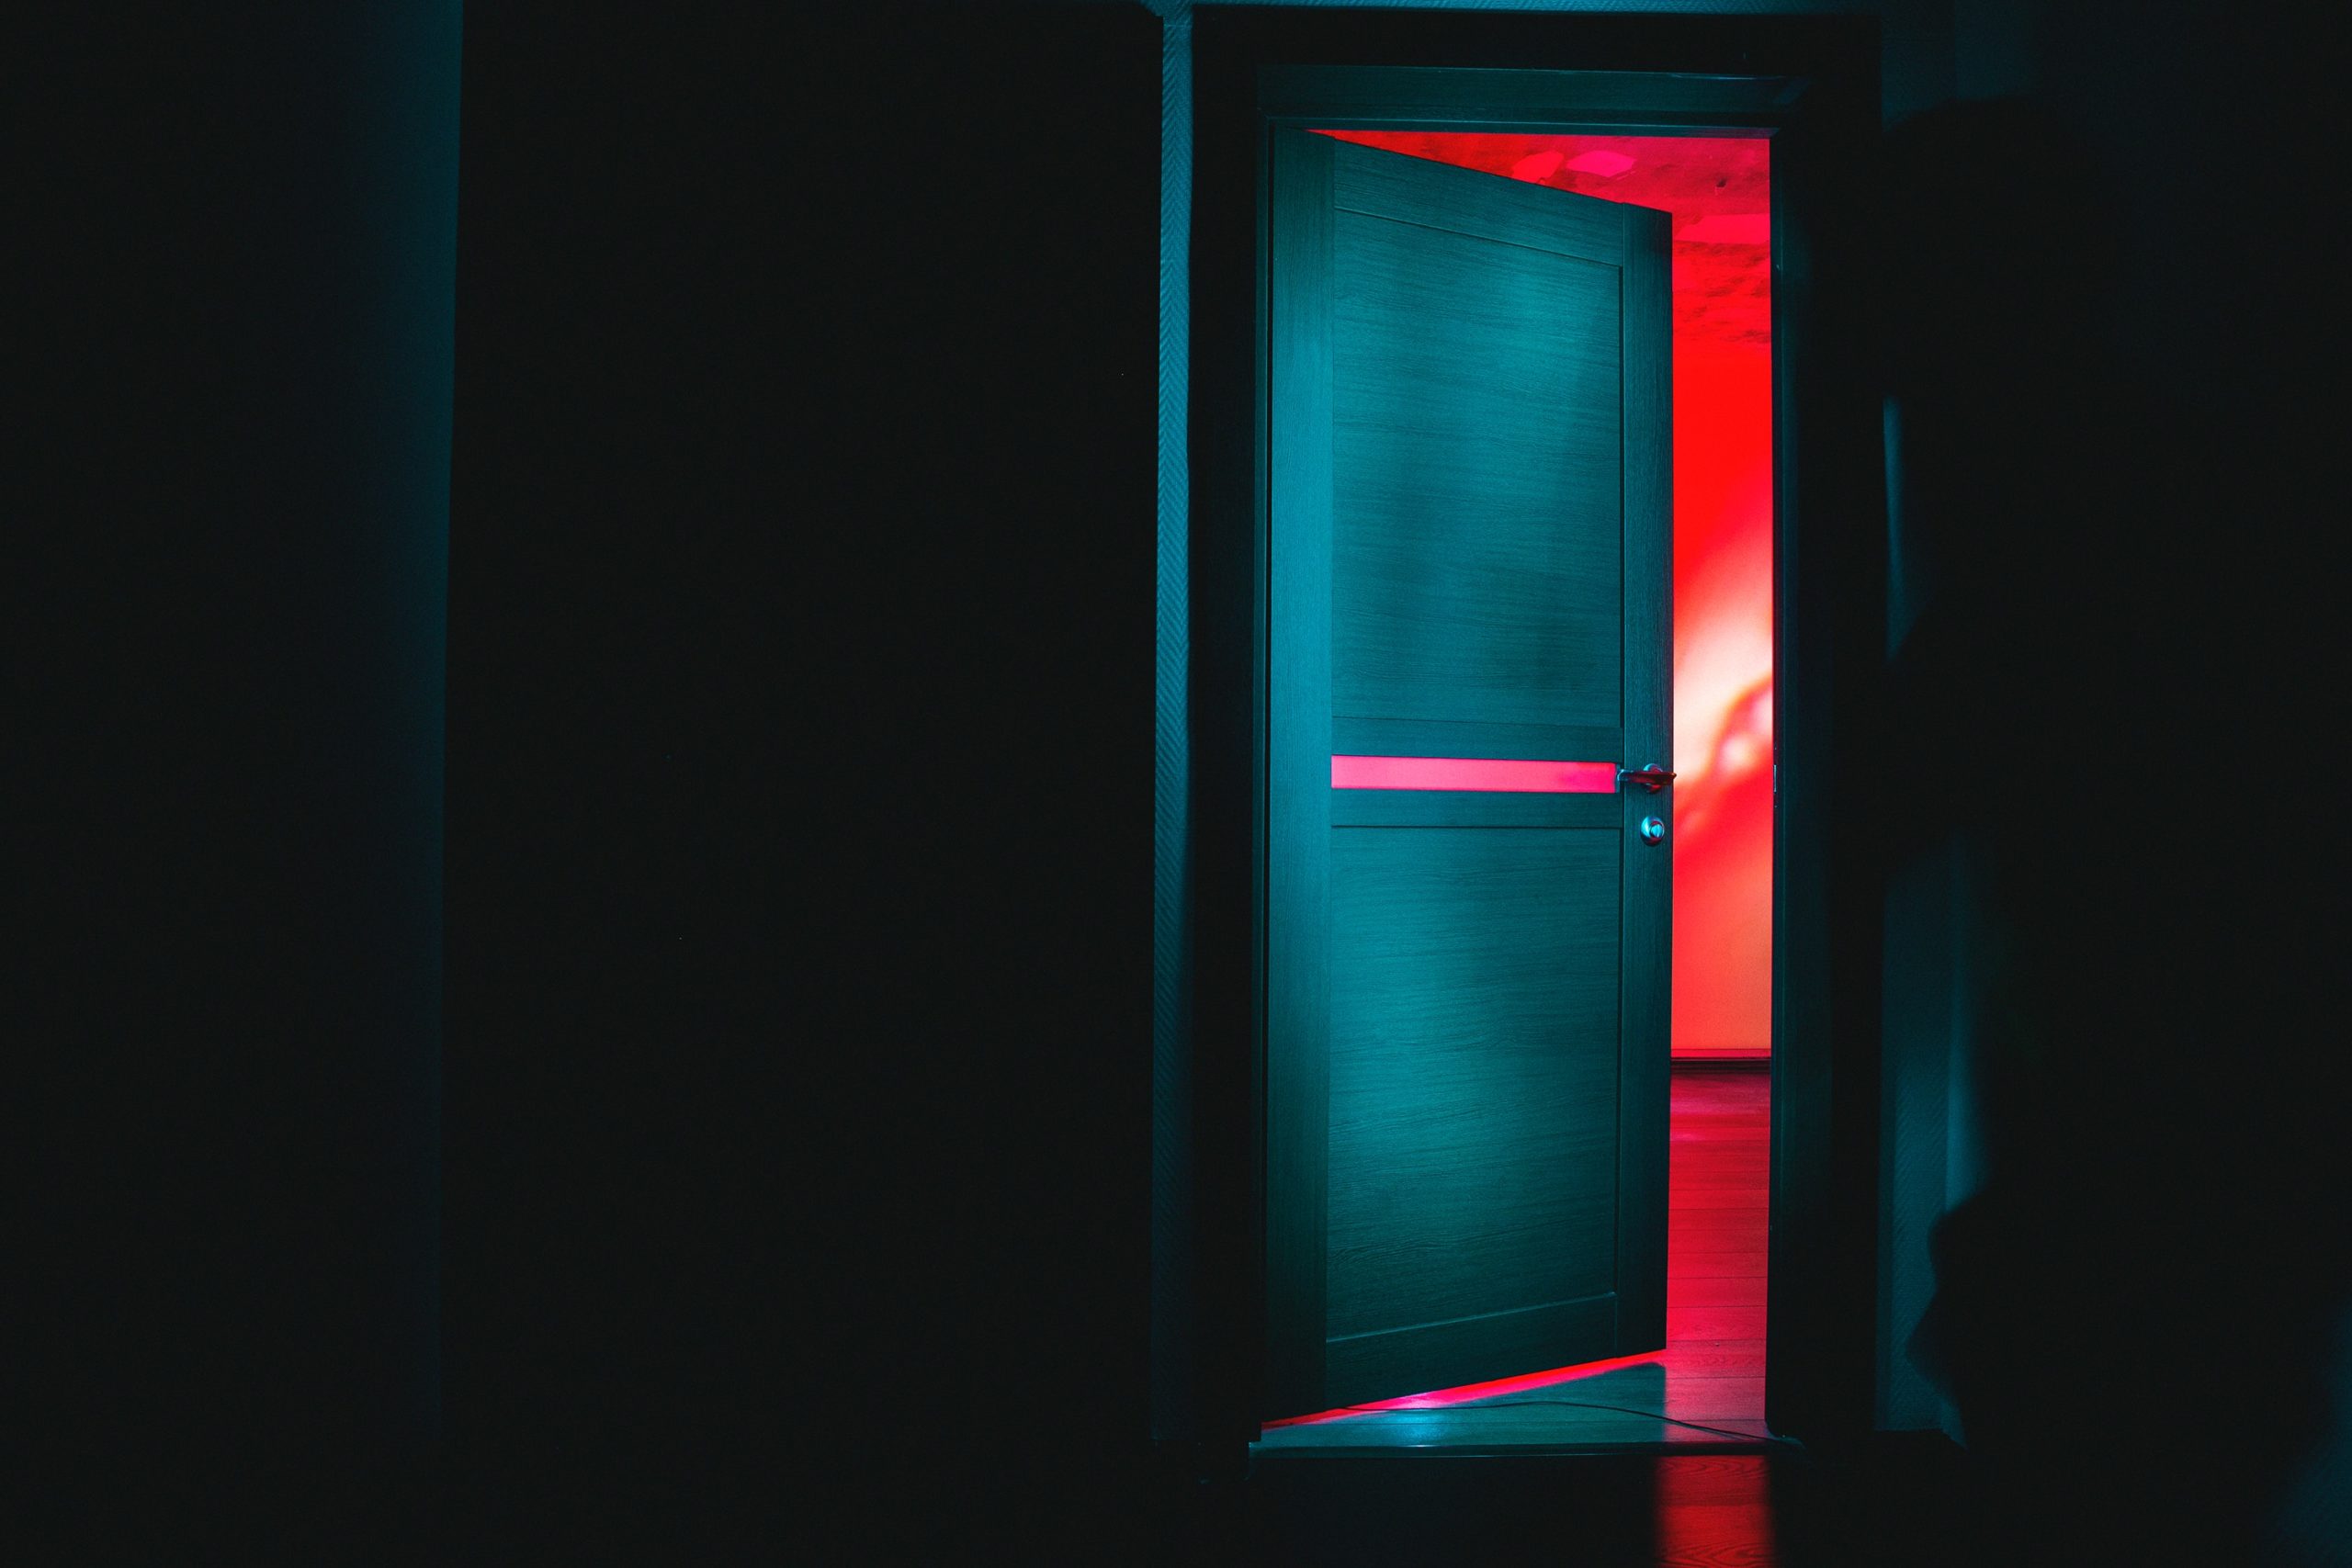 A pale door shadowed in darkness stands ajar, showing an alarmingly red room past it.